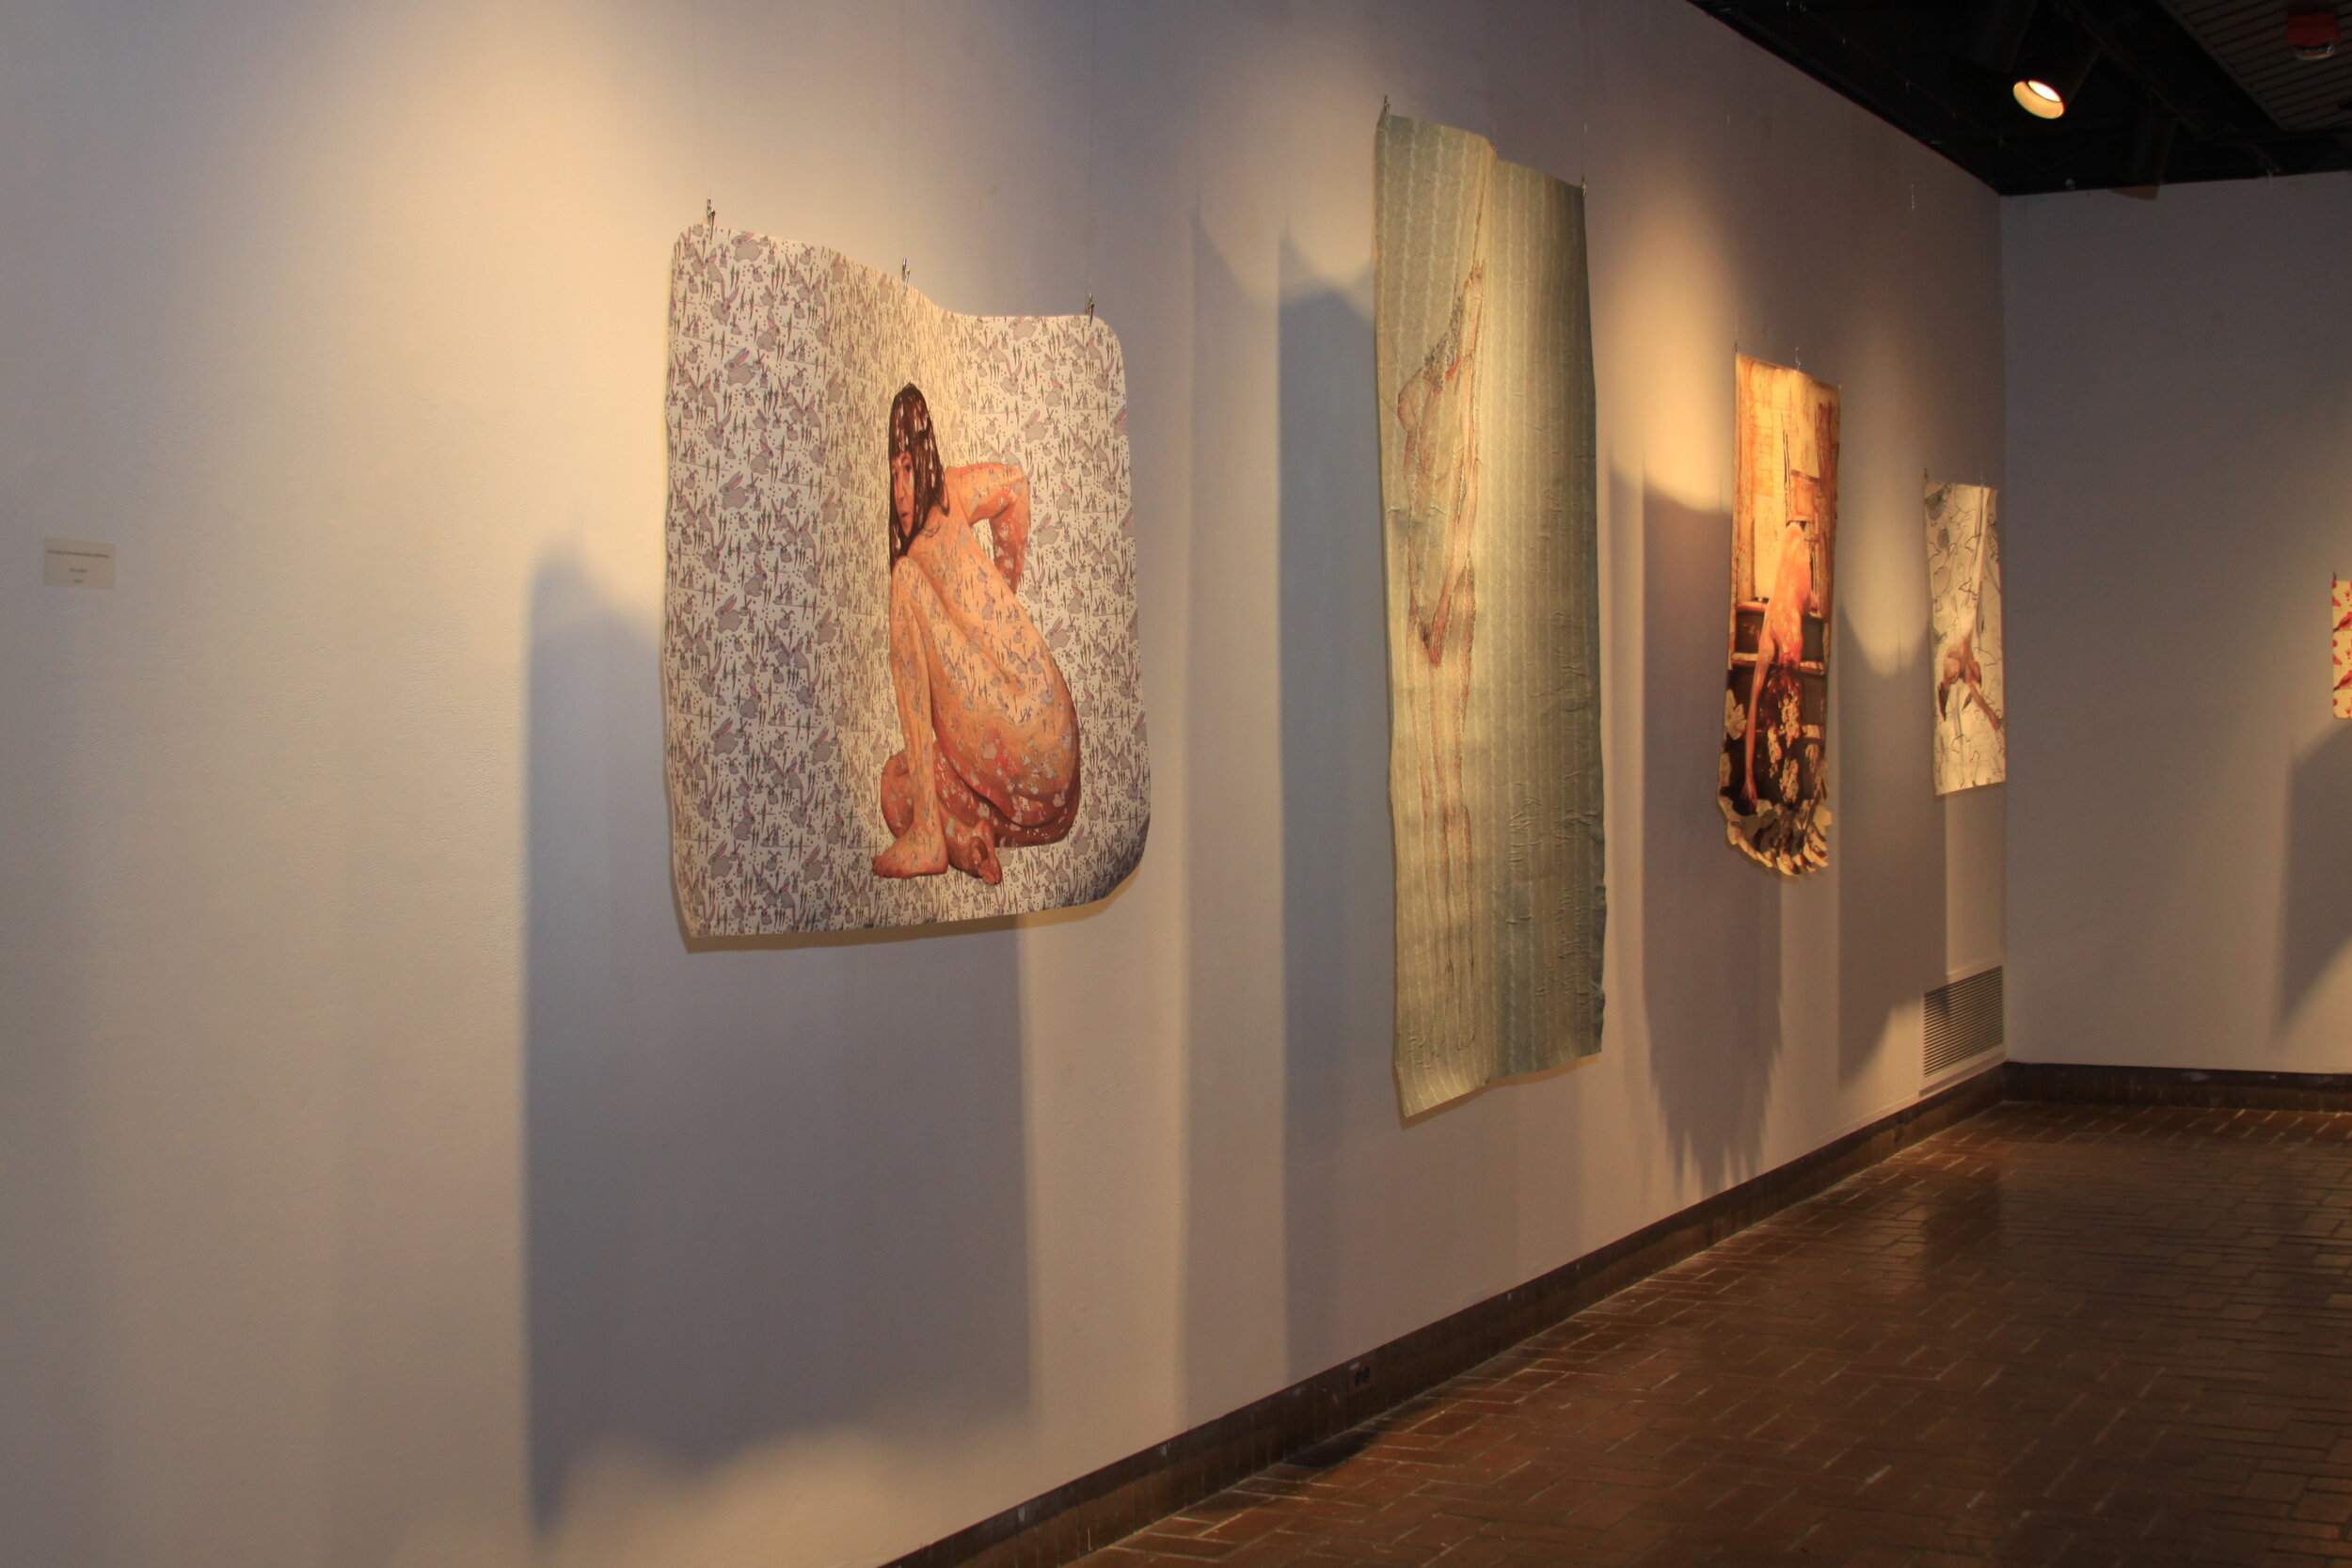  S. Tucker Cooke Gallery, "Fabricating Thresholds: Floral Femininity," Asheville, NC 